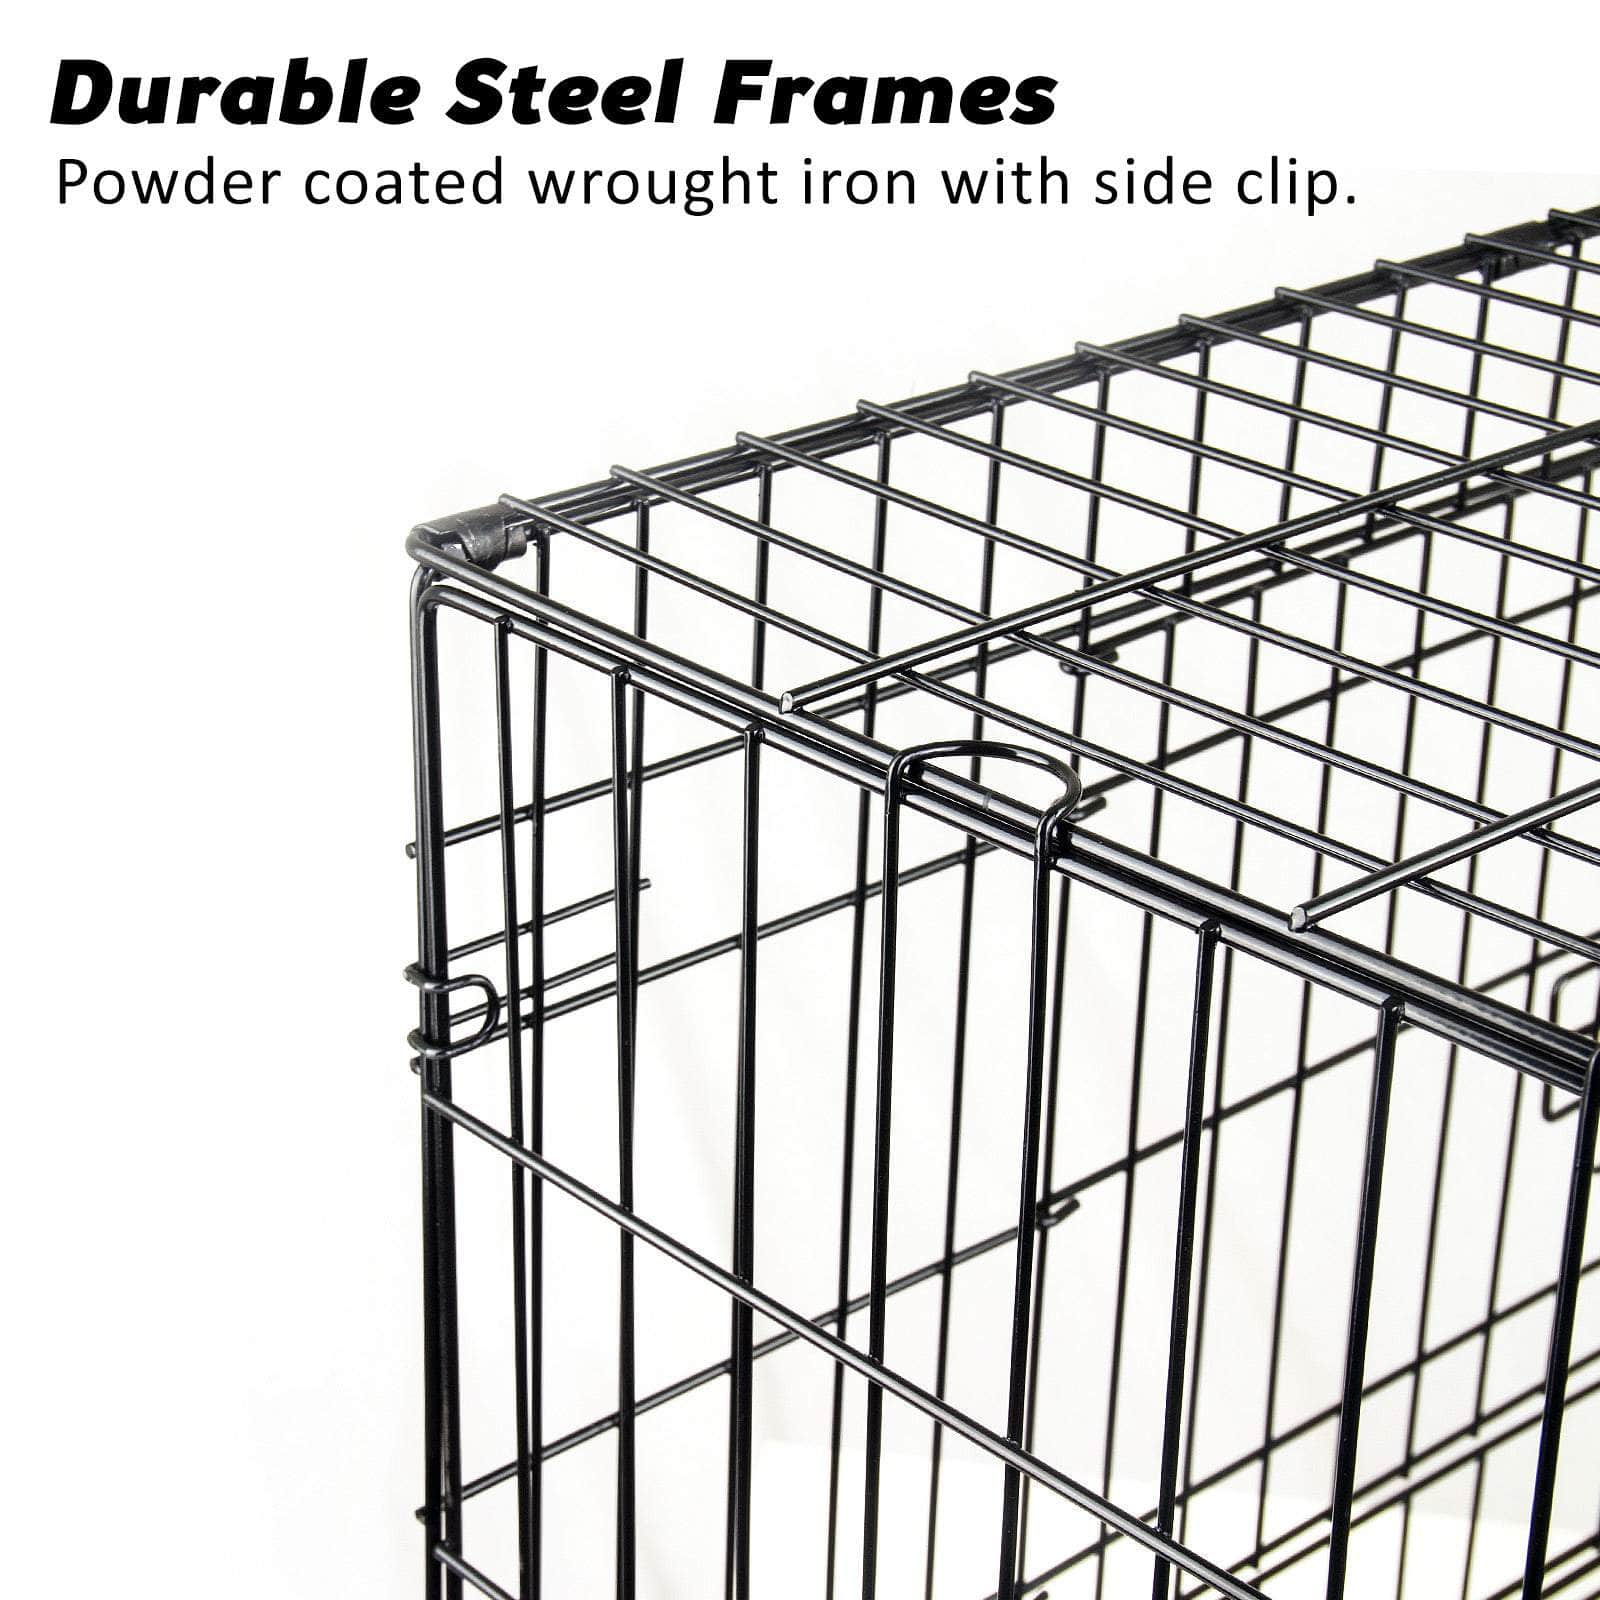 Wire Dog Cage Foldable Crate Kennel 48In With Tray + Cushion Mat Combo